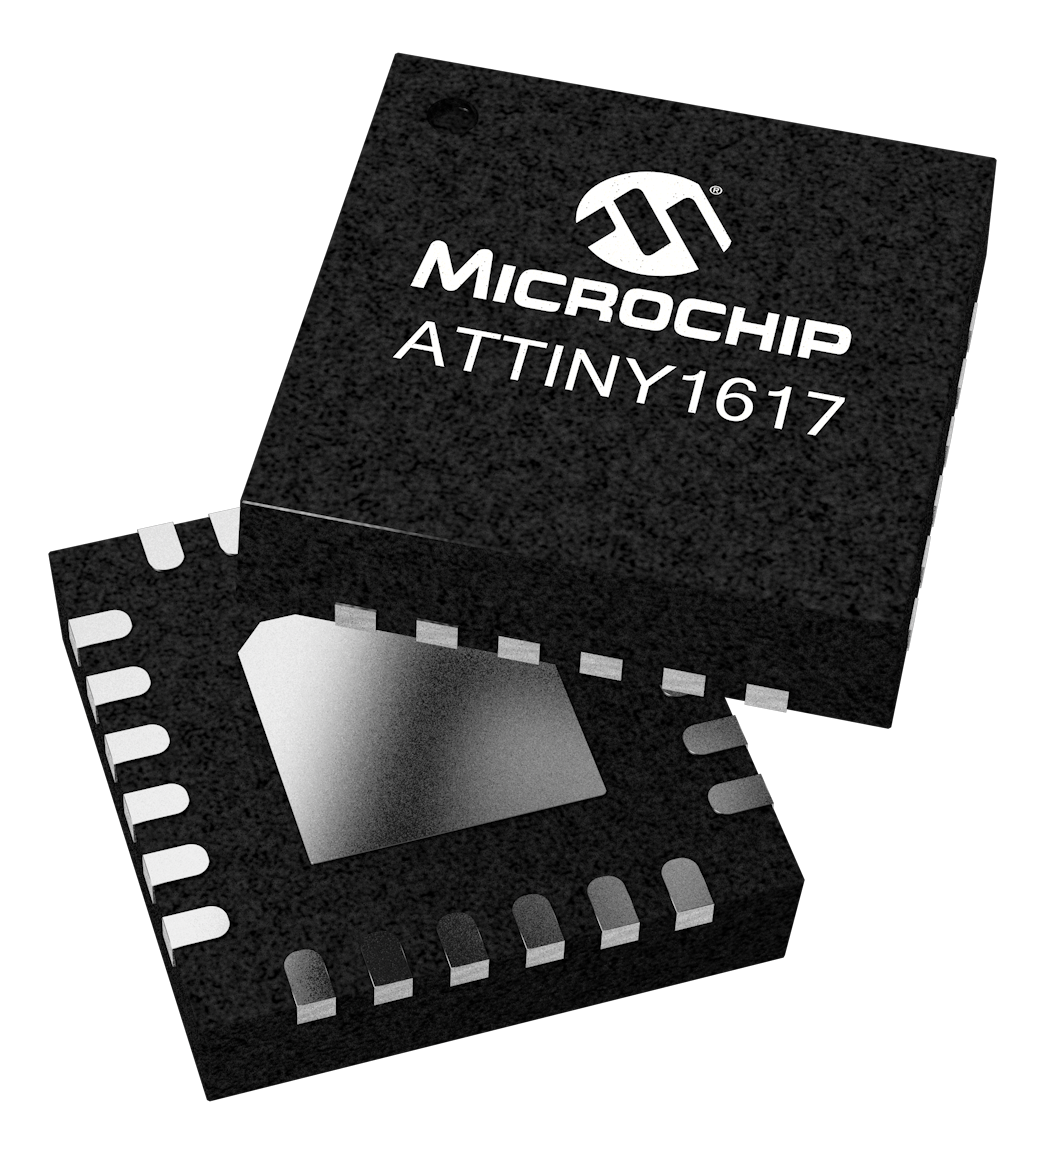 The ATtiny1617 microcontroller. Image credit: Microchip Technology